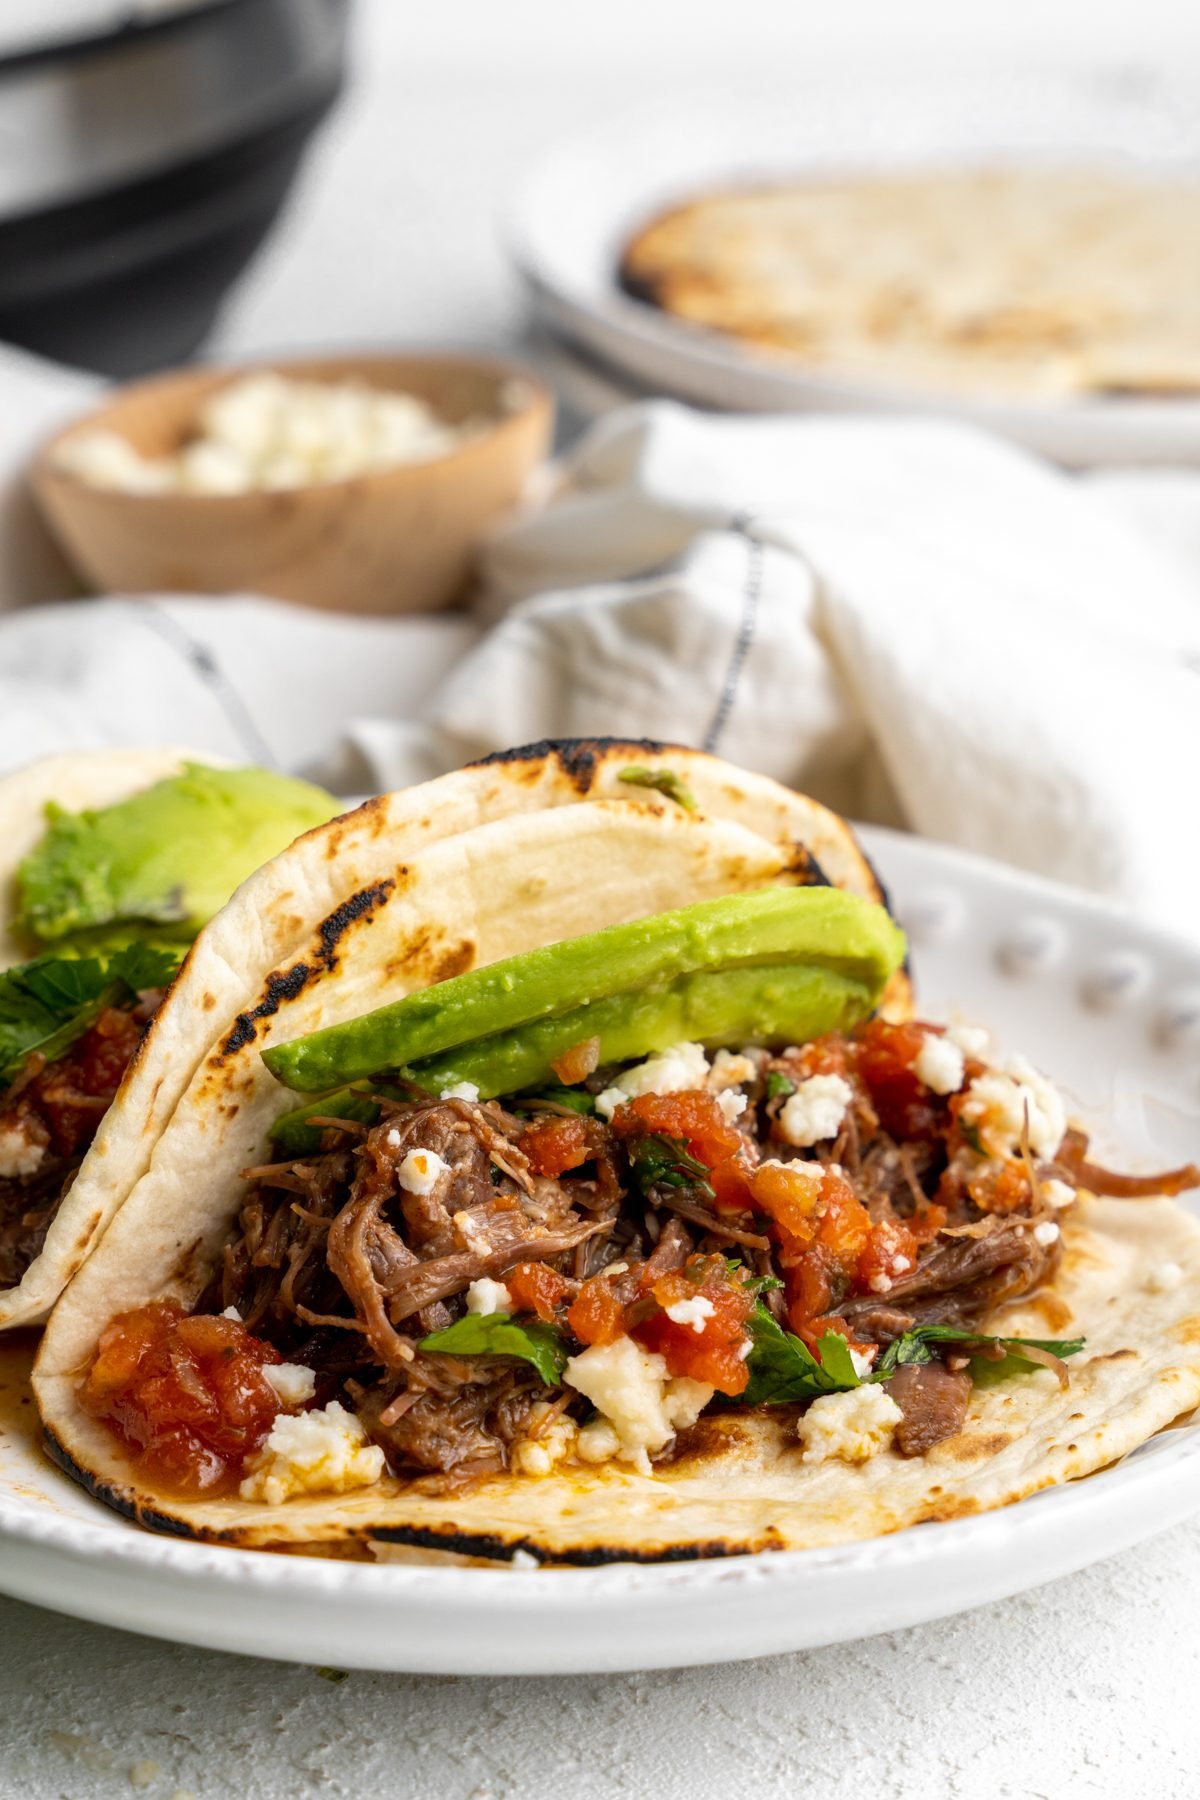 Shredded beef tacos on a white plate.